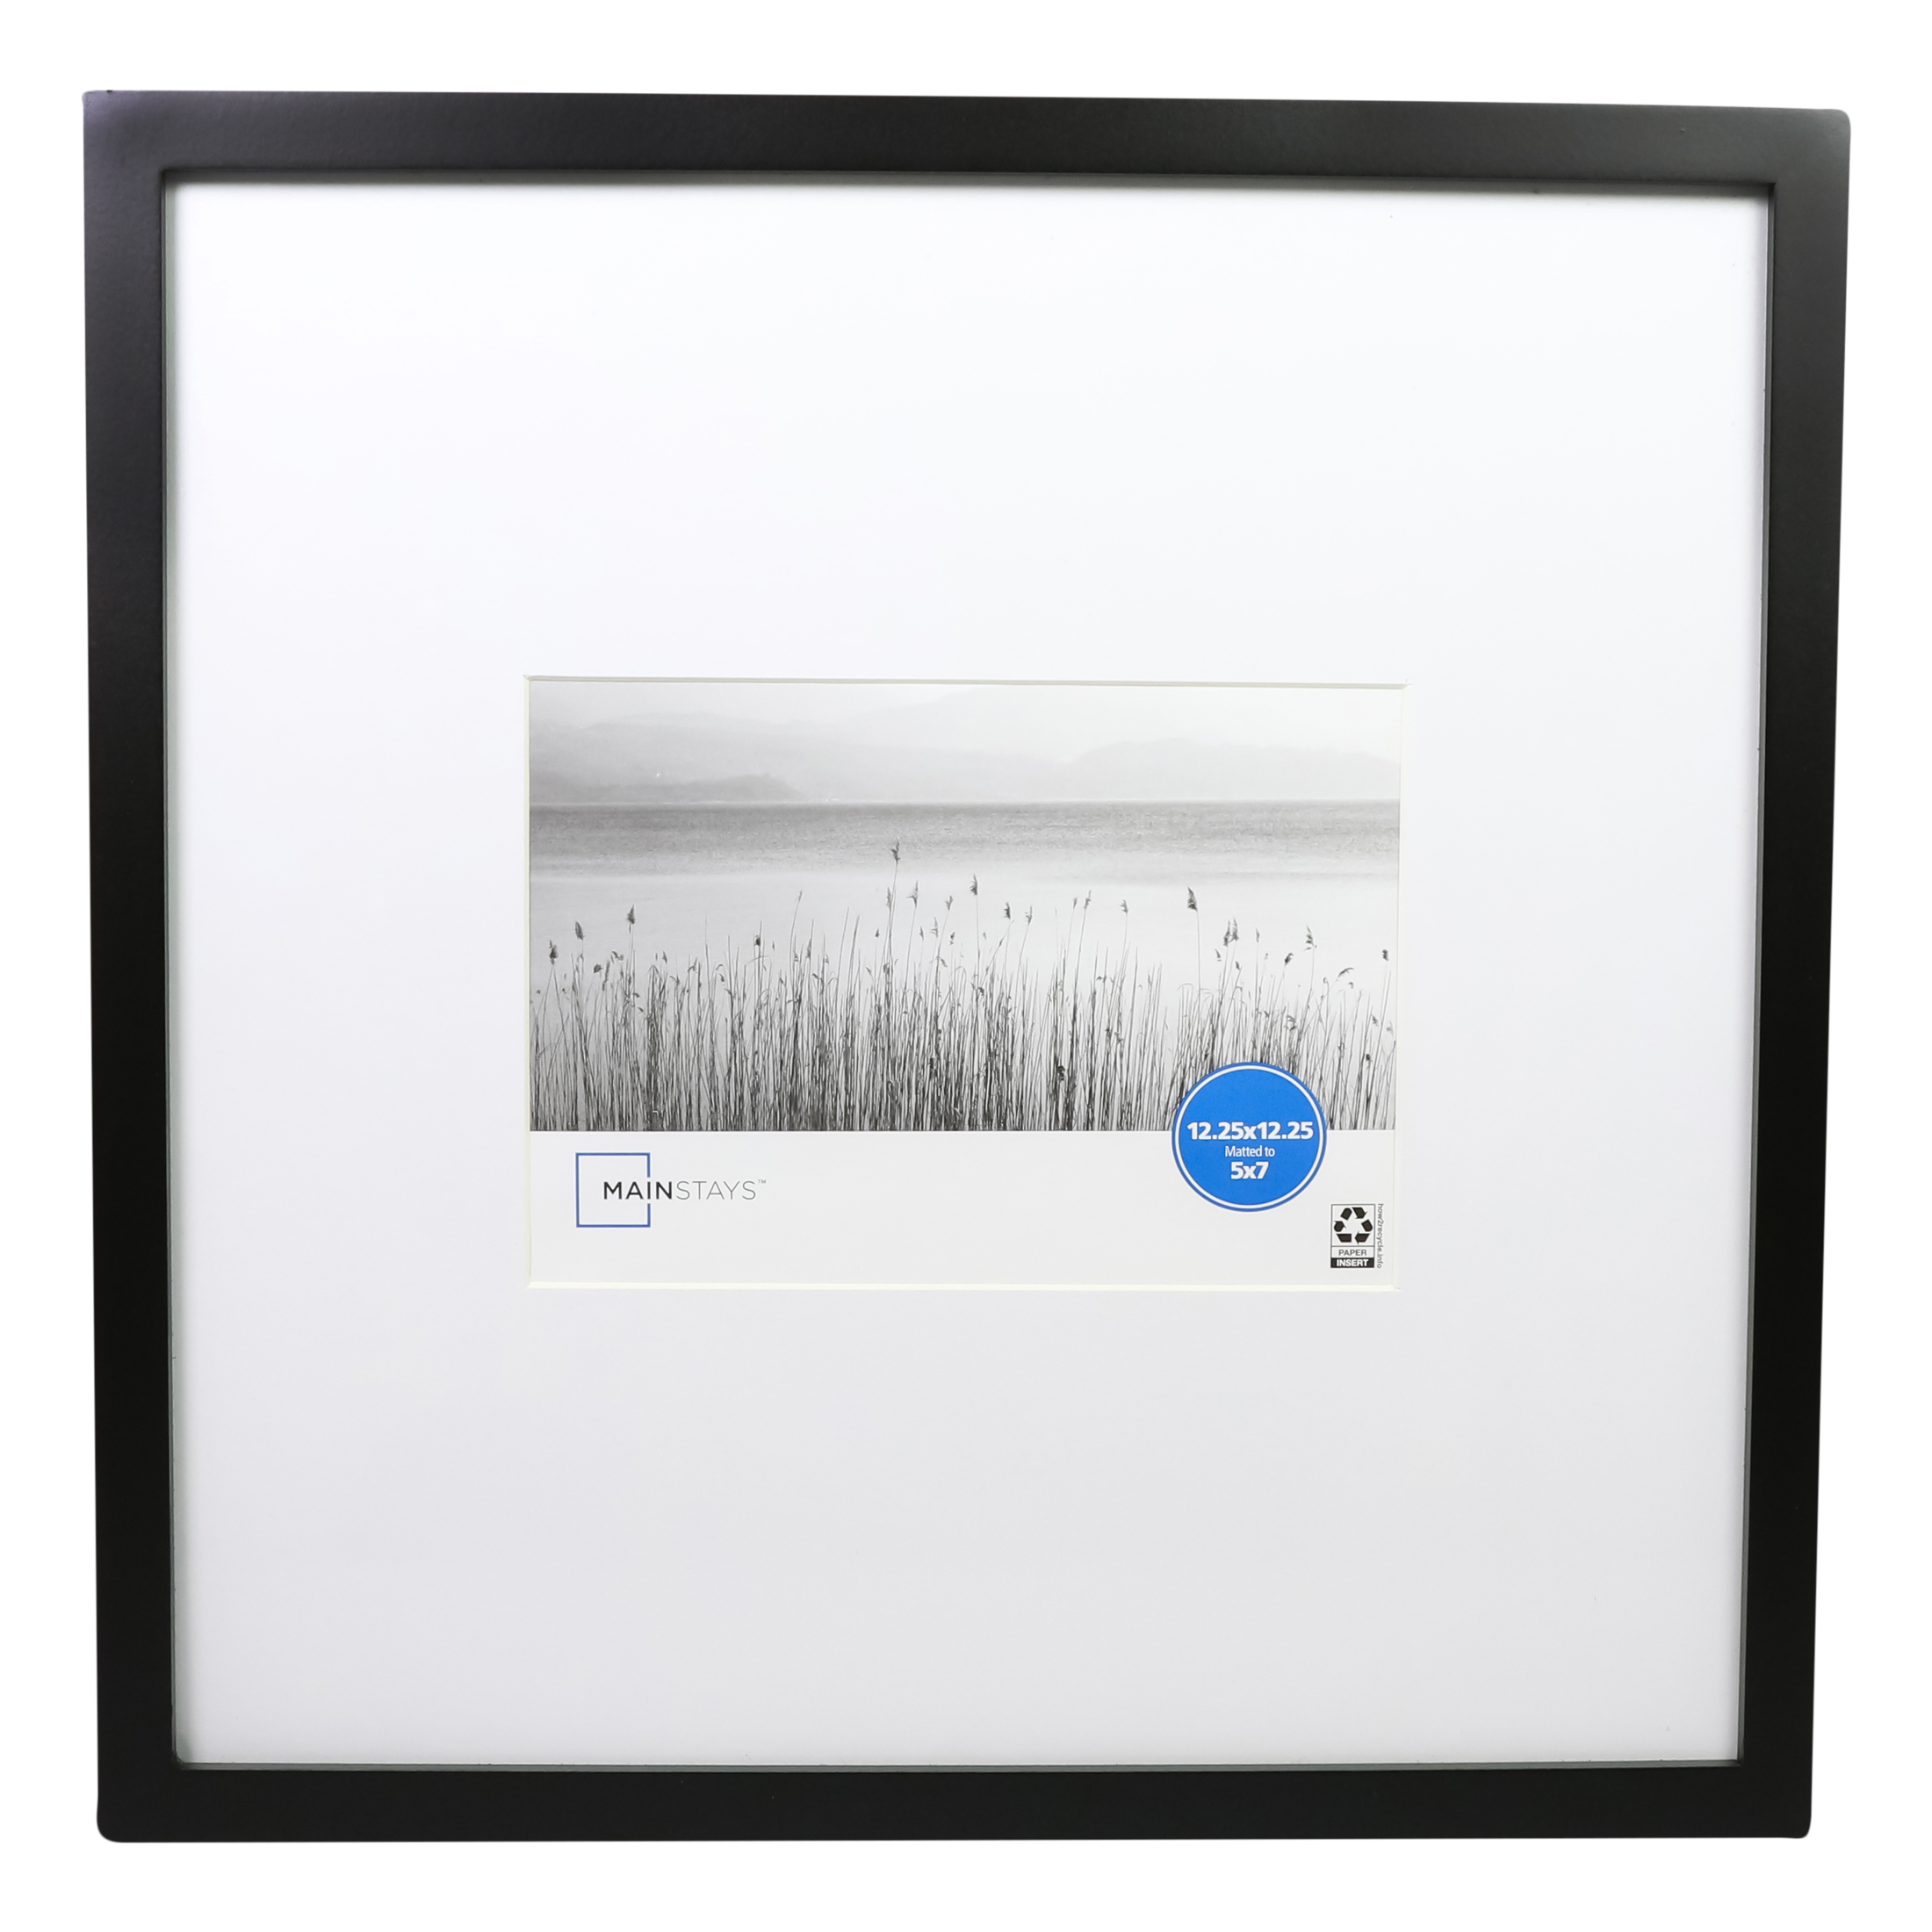 Mainstays 12.25x12.25 Matted to 5x7 Linear Gallery Wall Picture Frame, Set of 3 - image 2 of 8